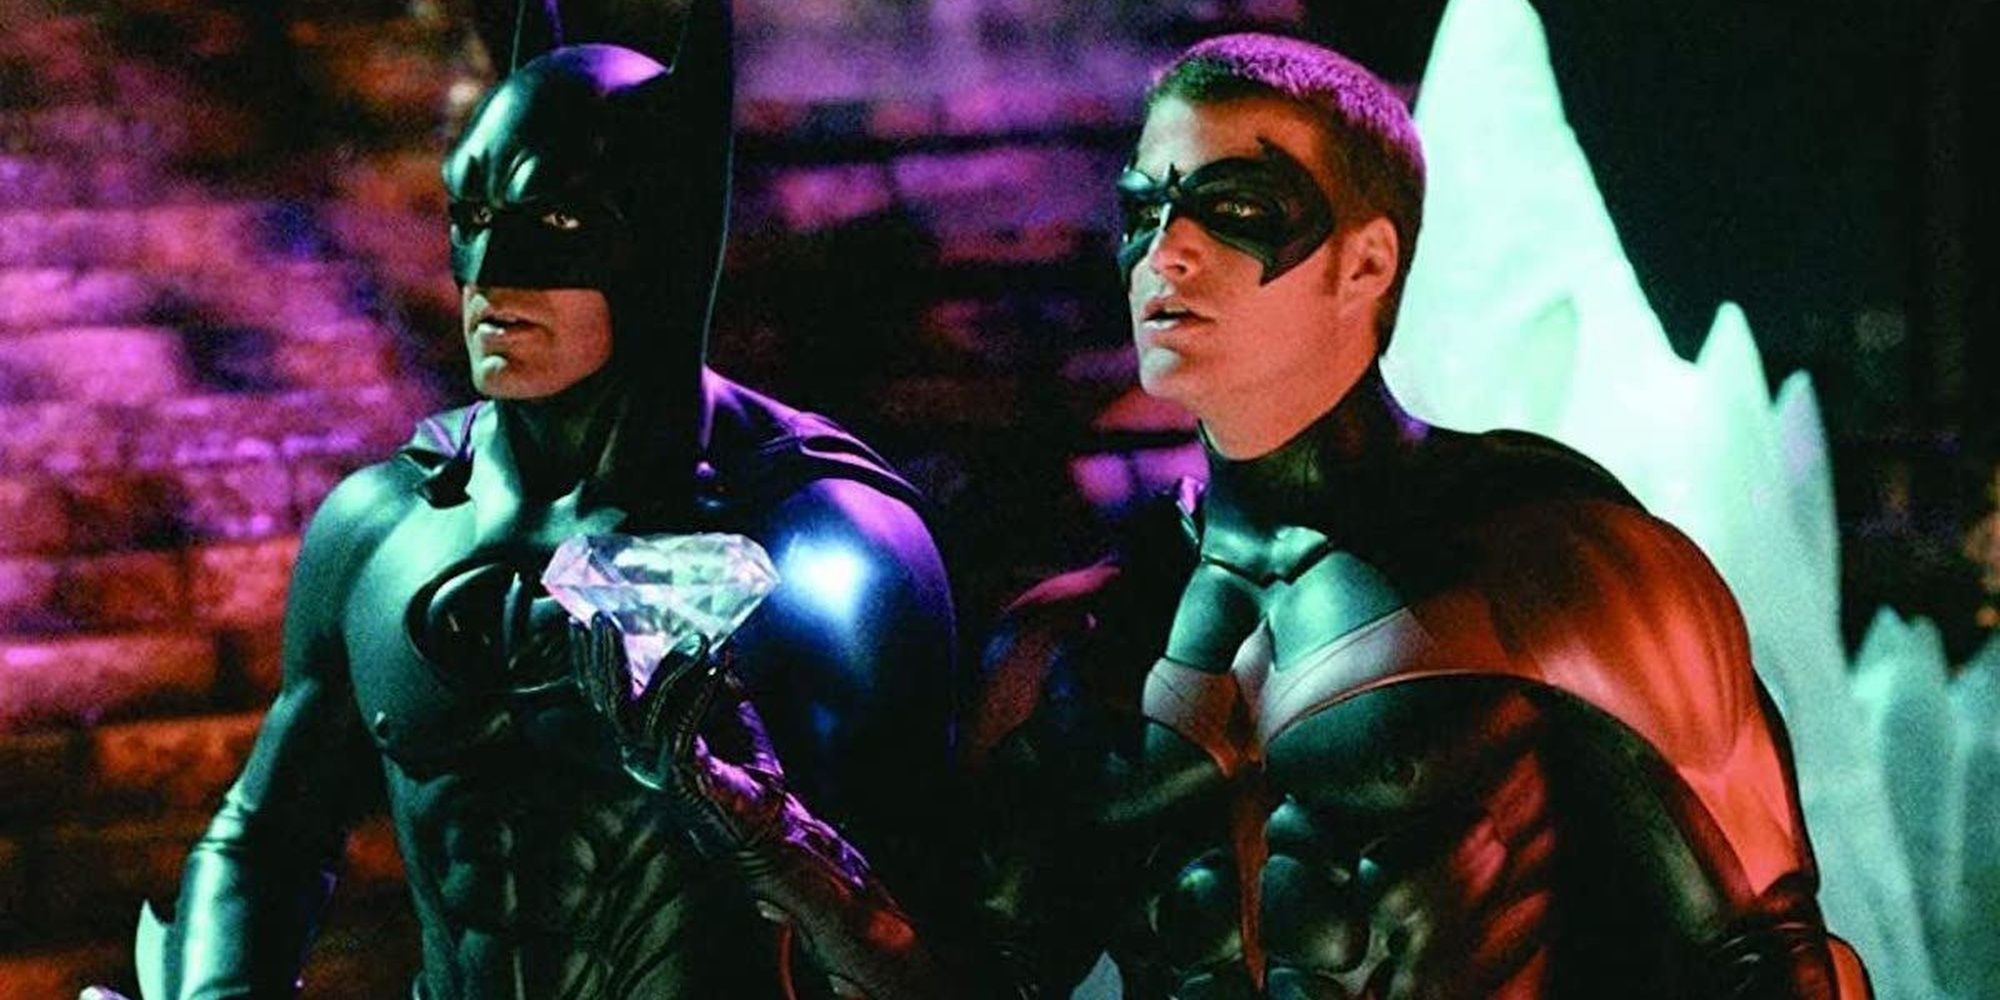 Batman and Robin (George Clooney and Chris O'Donnell)